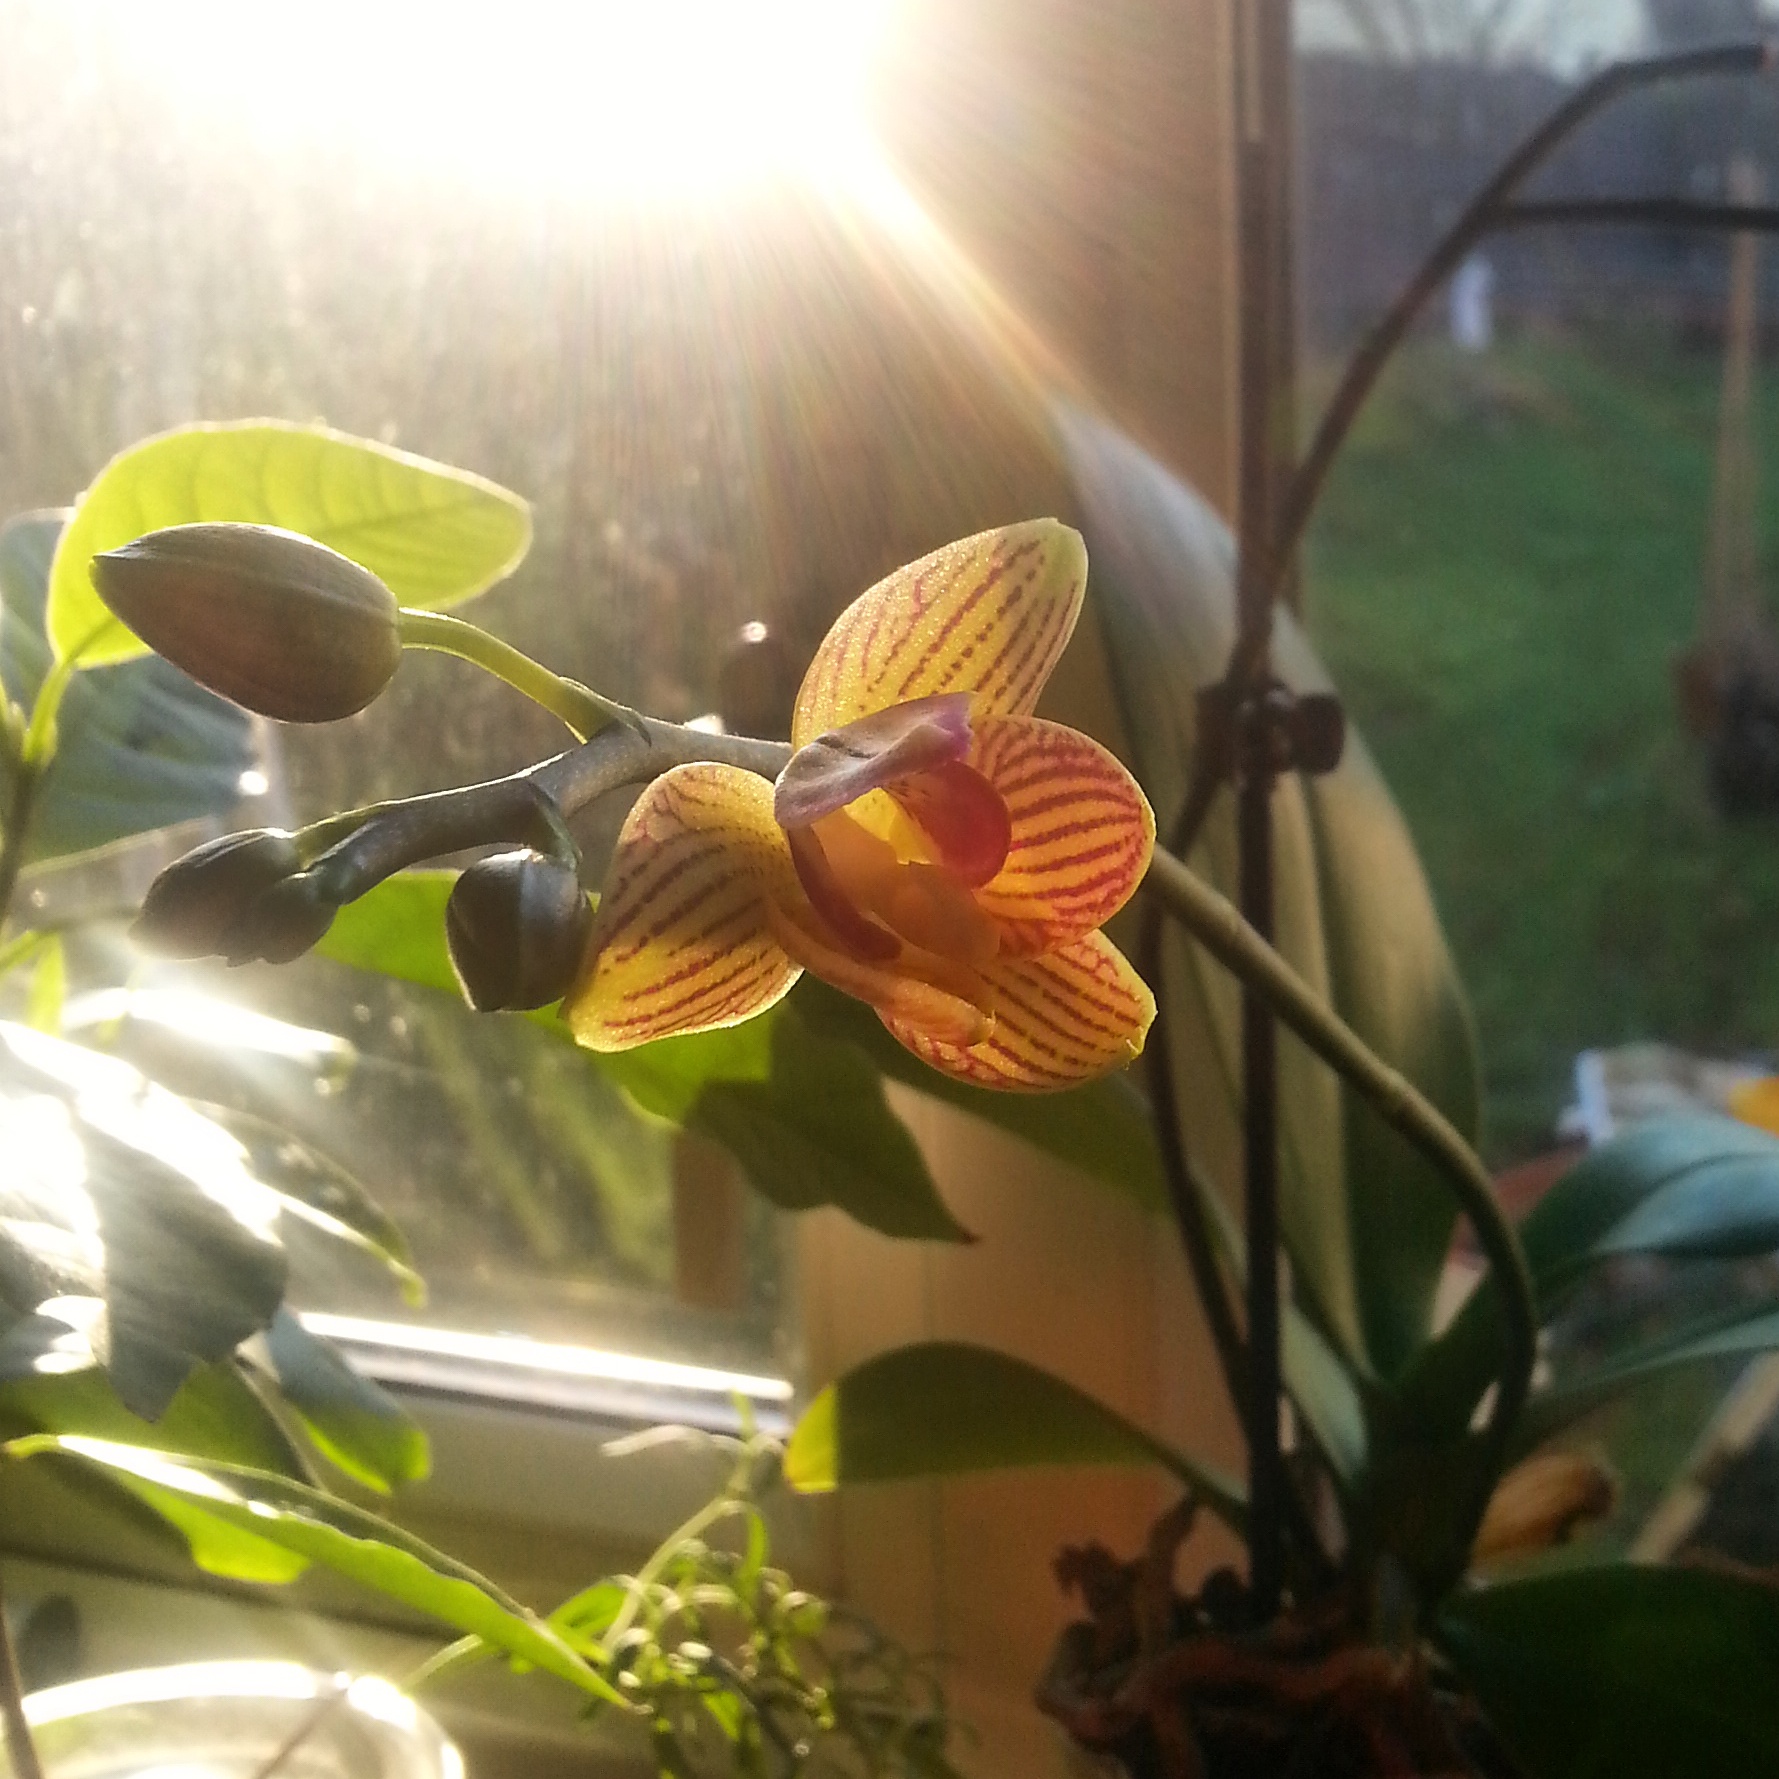 This orchid has come into bloom again. Repeat blooming orchids make me extremely happy!